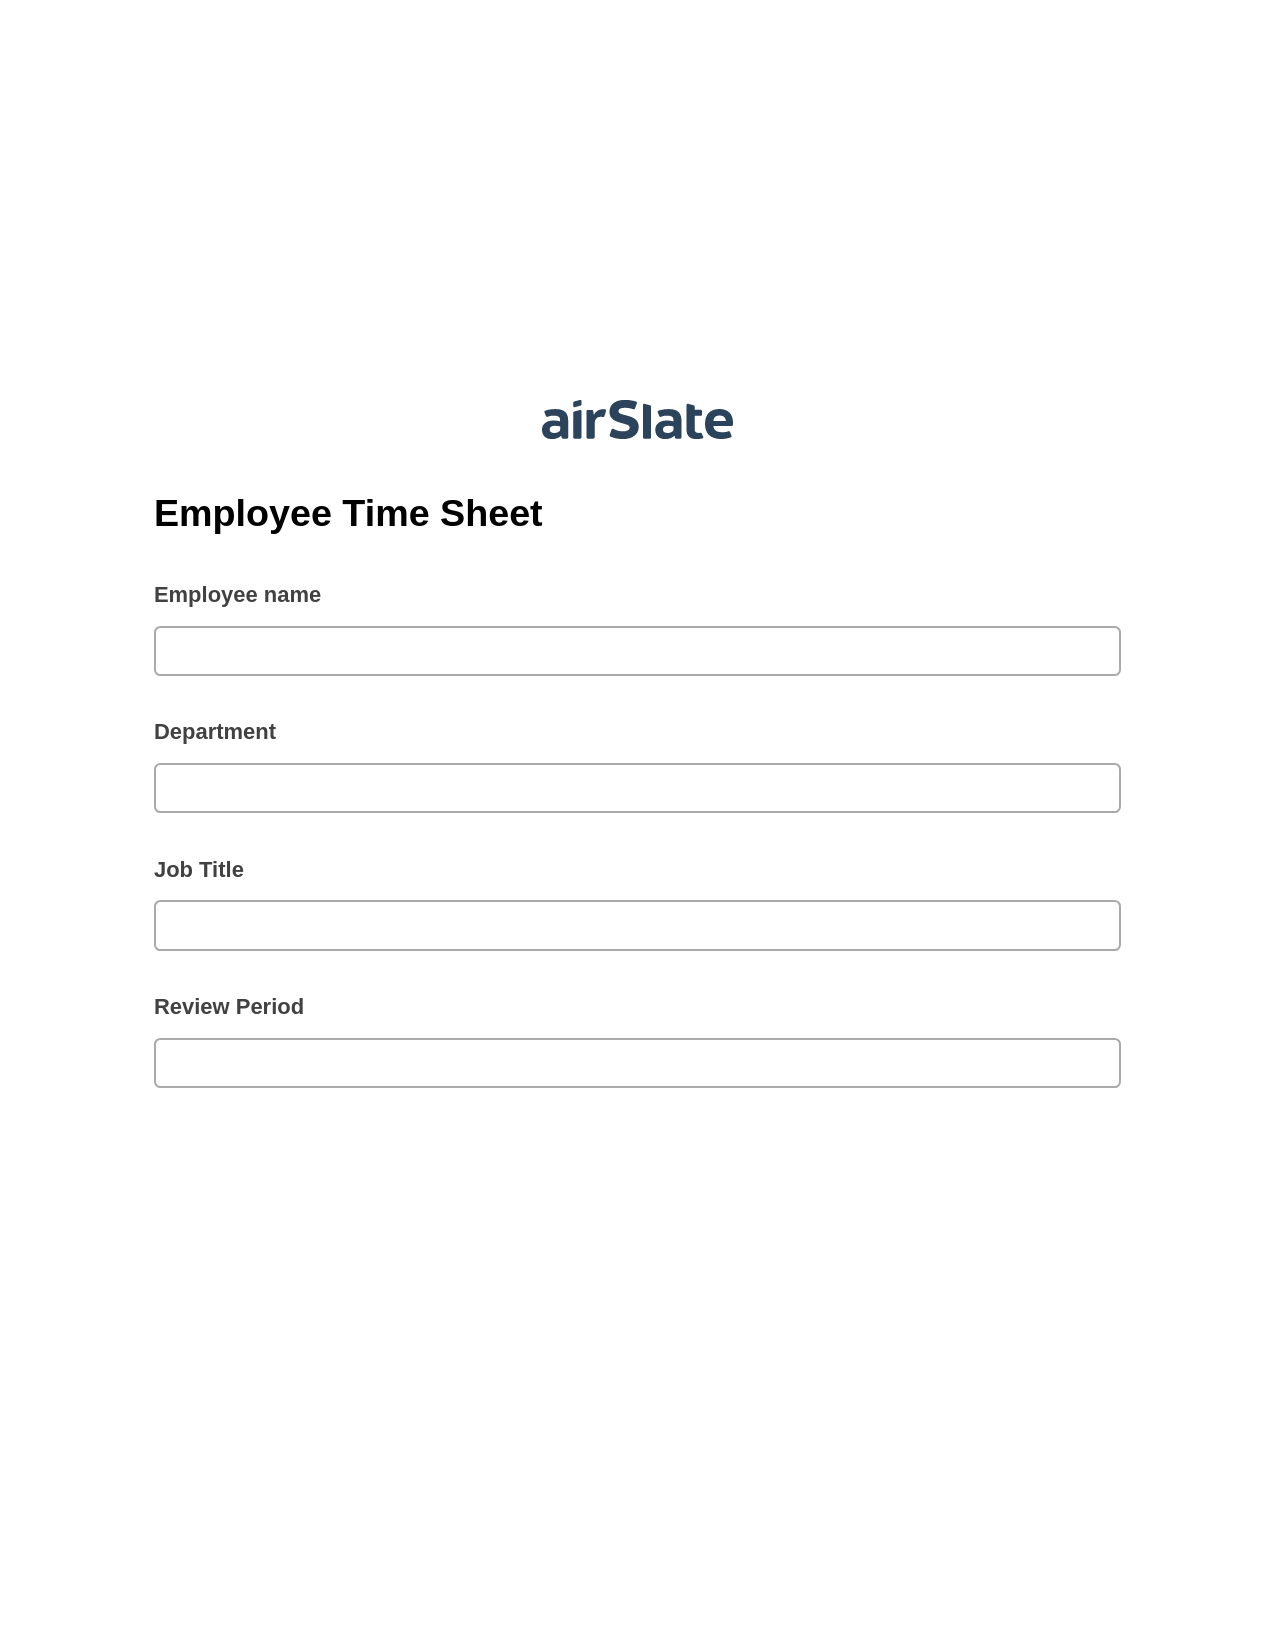 Multirole Employee Time Sheet Pre-fill from Smartsheet Bot, Update Audit Trail Bot, Export to Excel 365 Bot